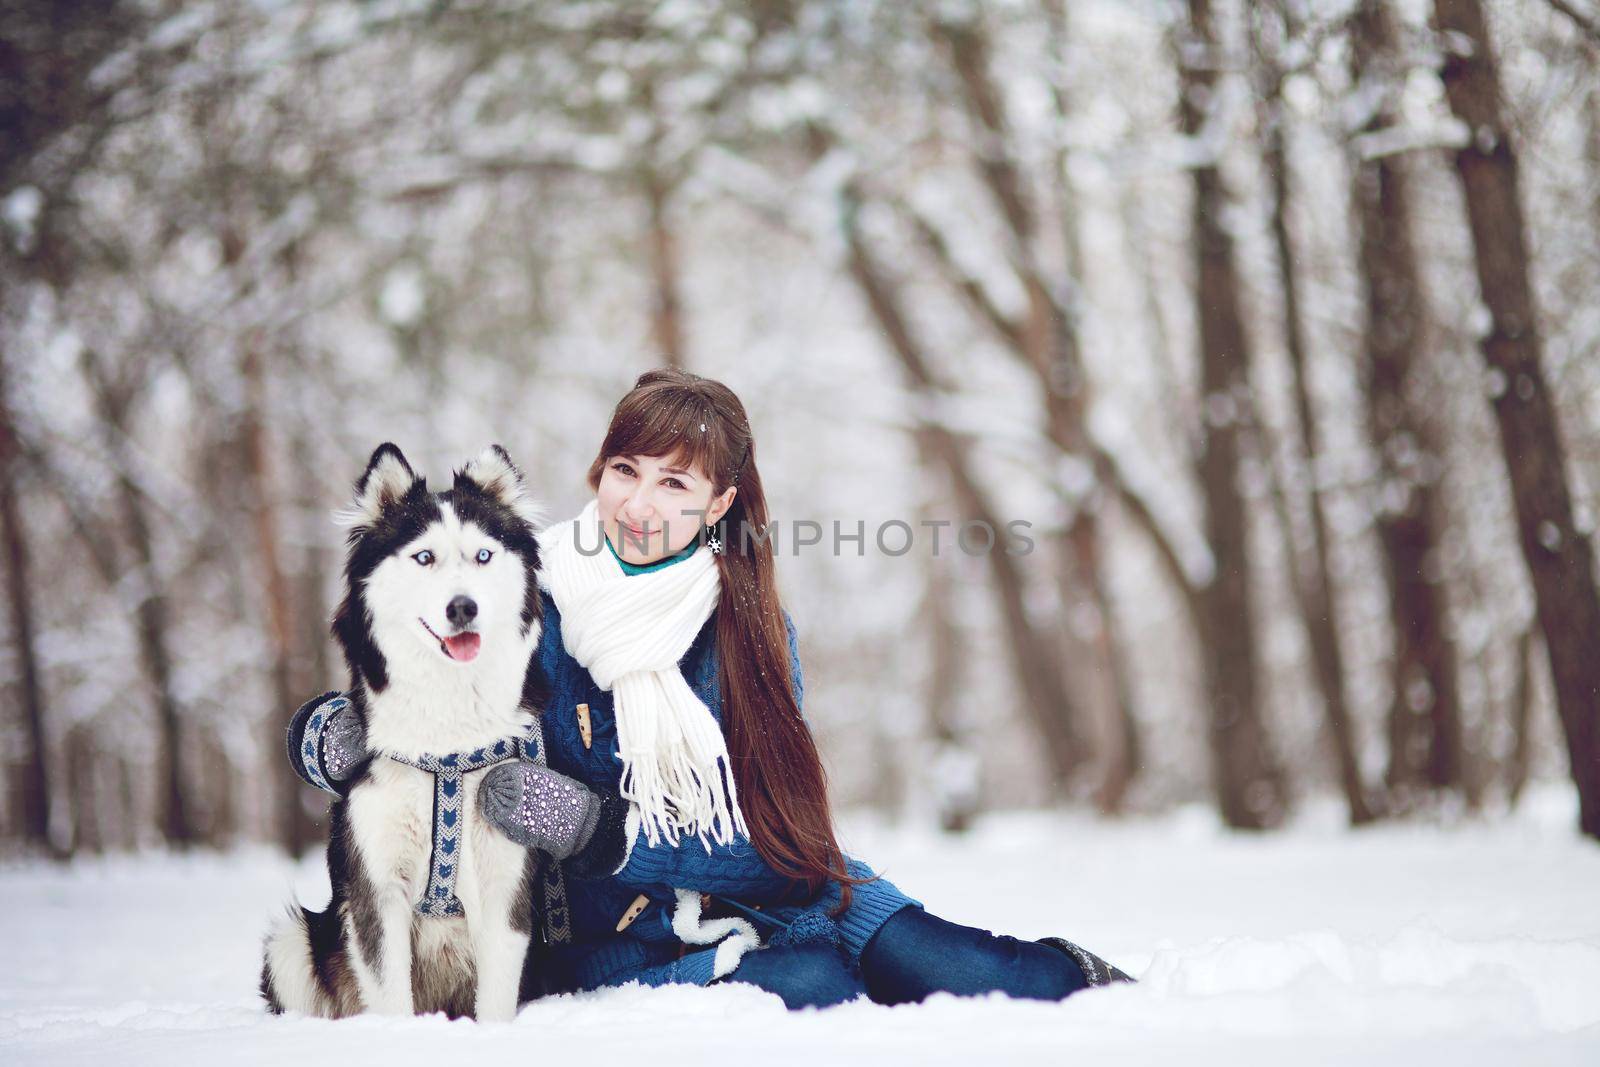 Girl sitting in the snow with a siberian husky dog in the winter forest by selinsmo